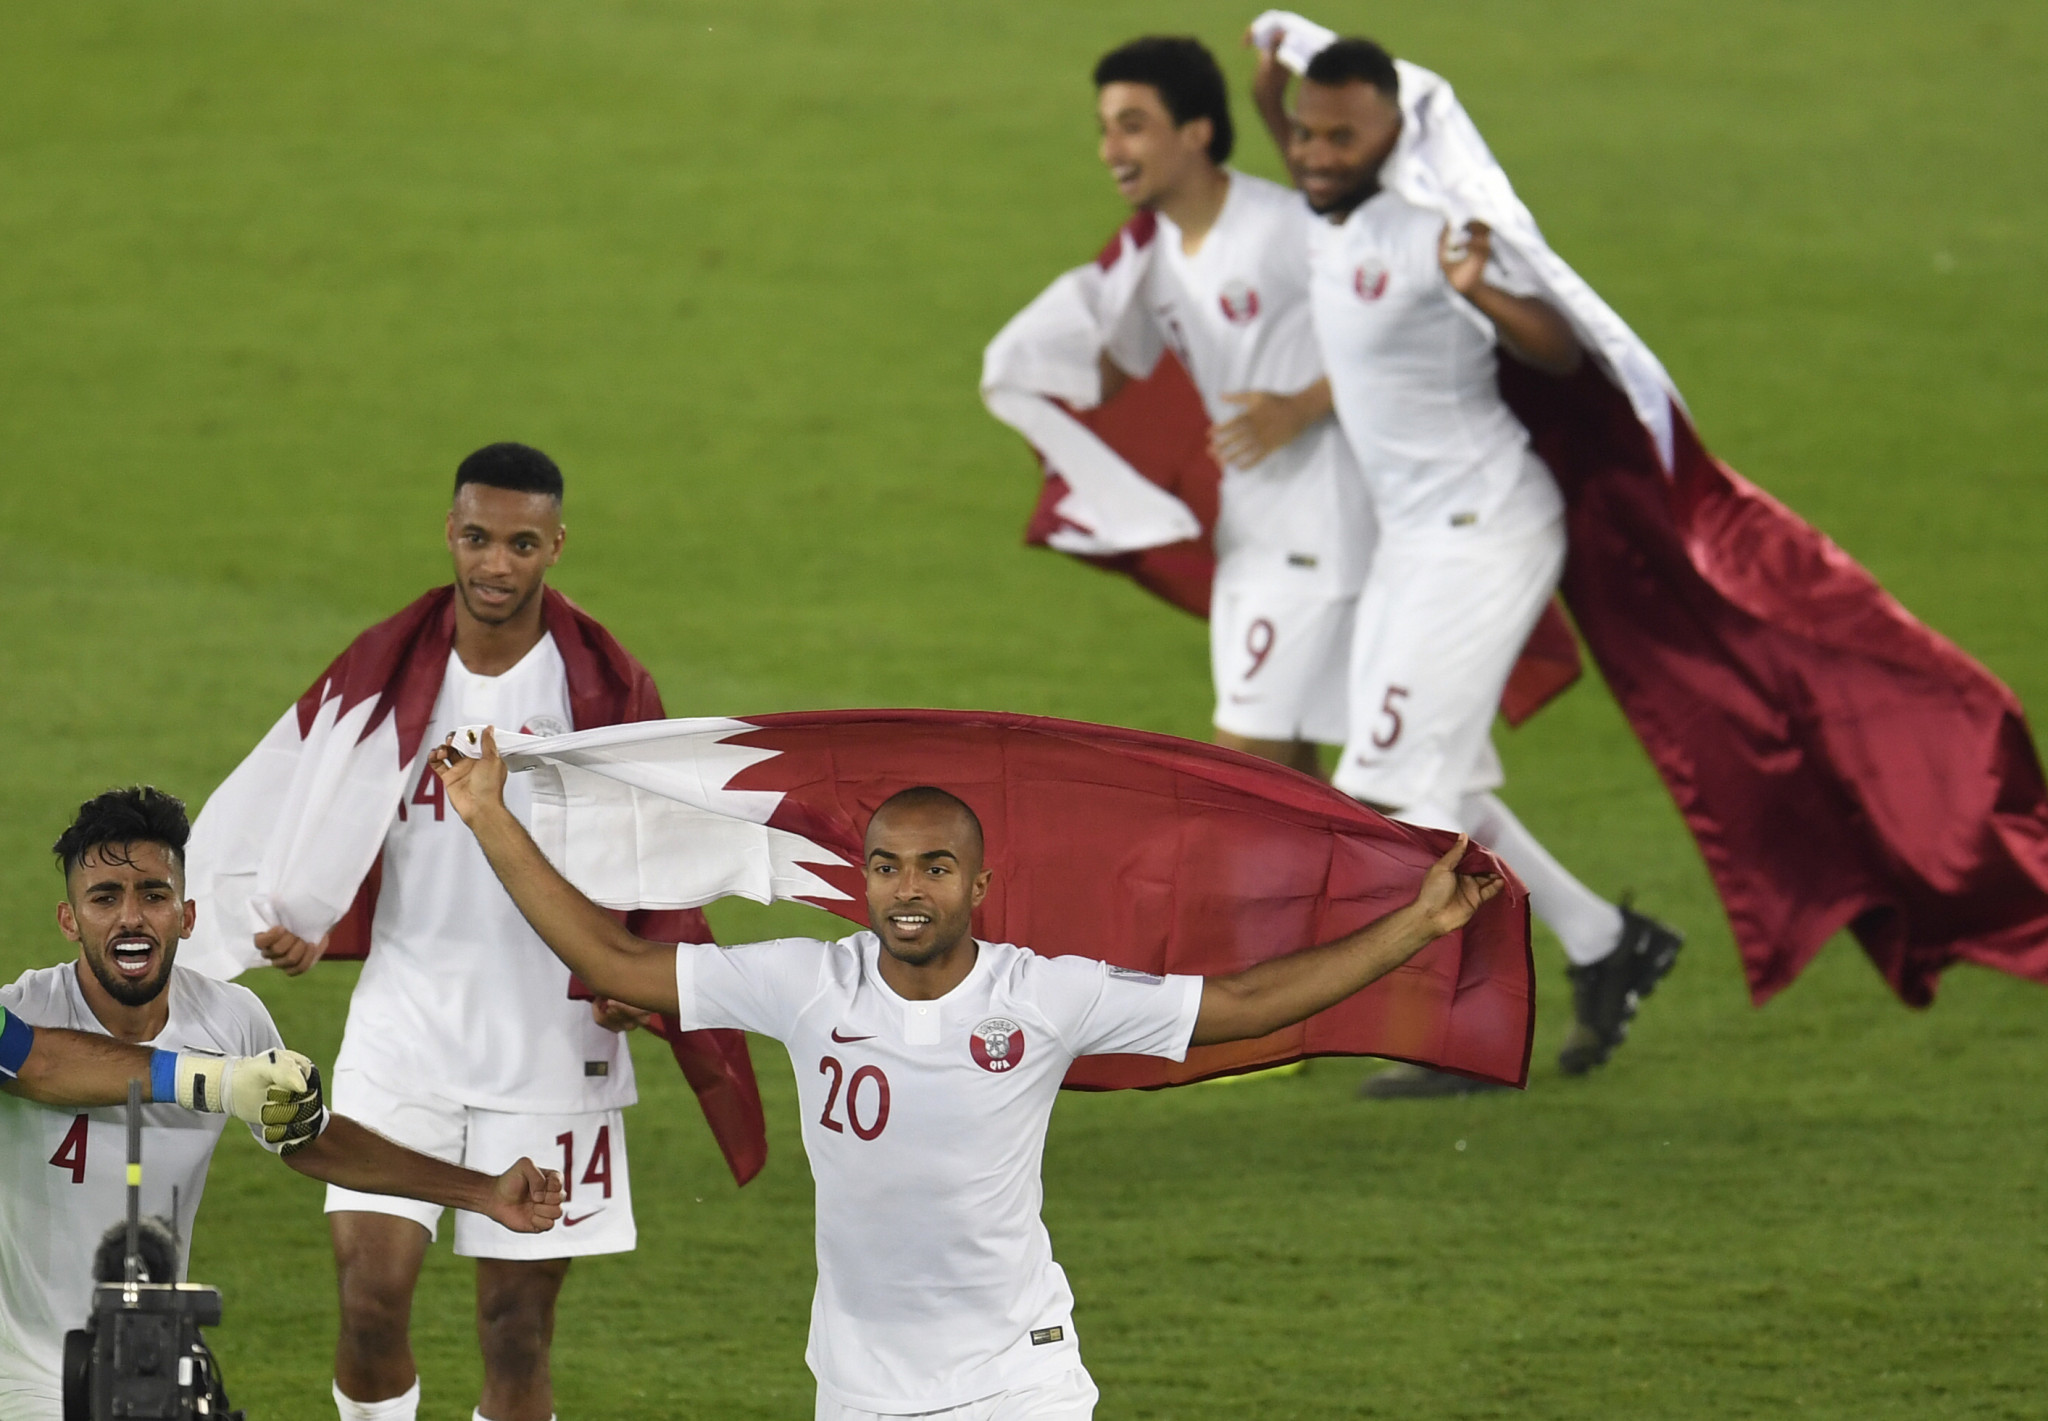 Spectacular overhead kick helps Qatar seal first AFC Asian Cup title 